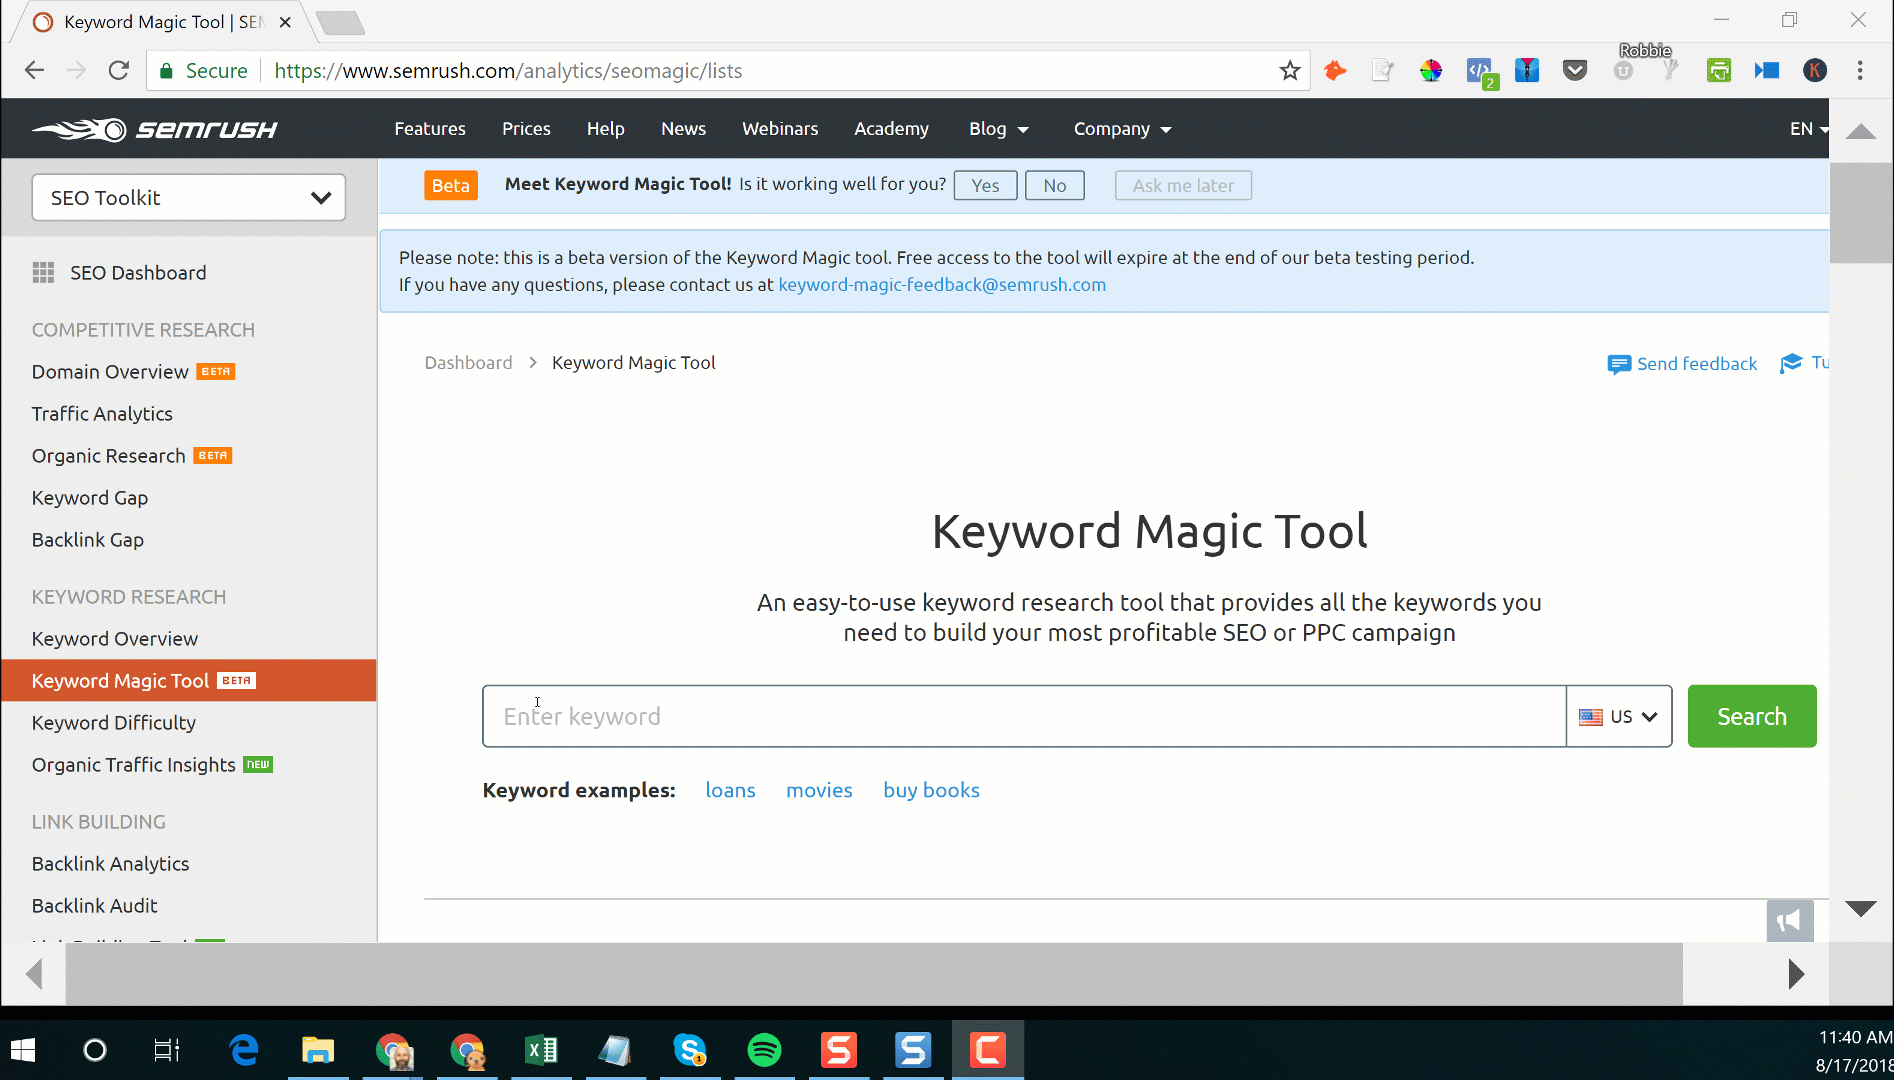 GIF showing how to use SEMrush KW Magic Tool